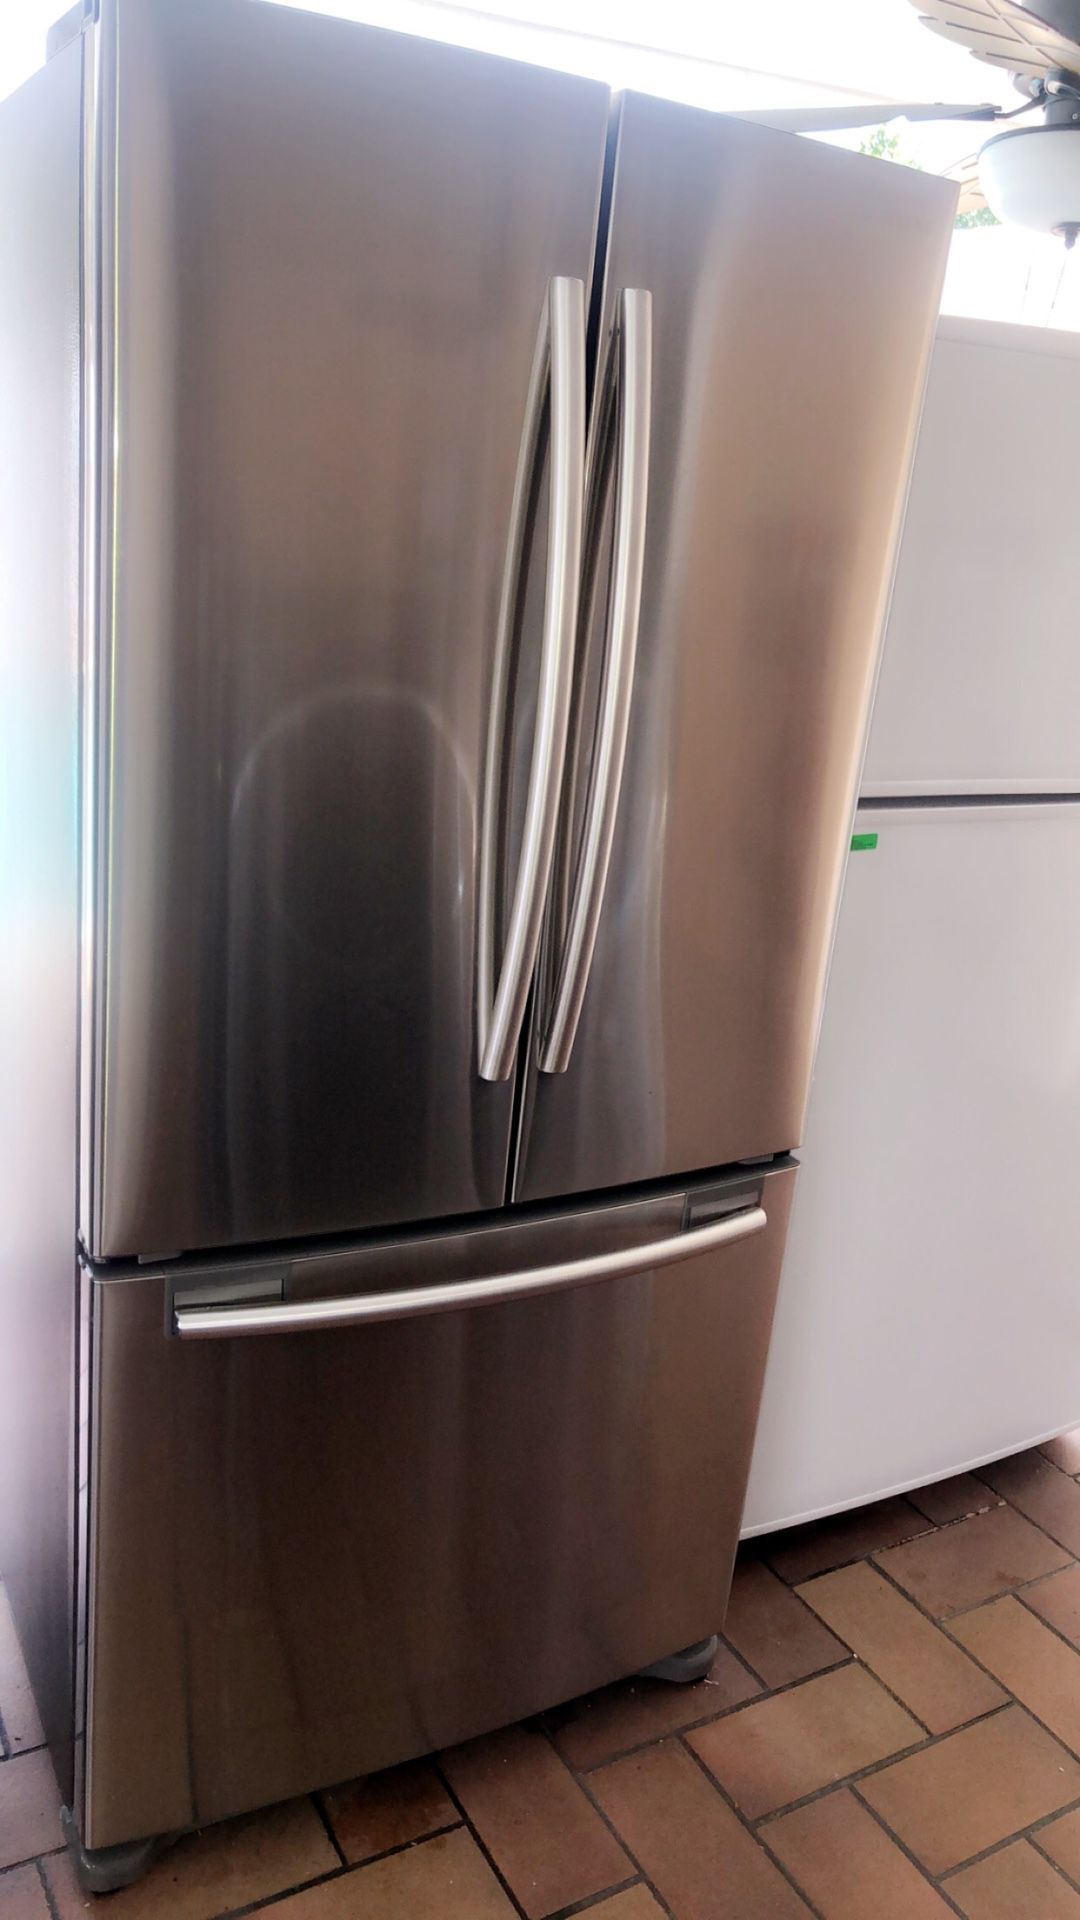 SAMSUNG STAINLESS STEEL REFRIGERATOR IN PERFECT CONDITIONS WITH WARRANTY 33 WIDE AND ICE MAKER. NEVERA STAINLESS STEEL COMO NUEVA SAMSUNG DE 33 PULGA